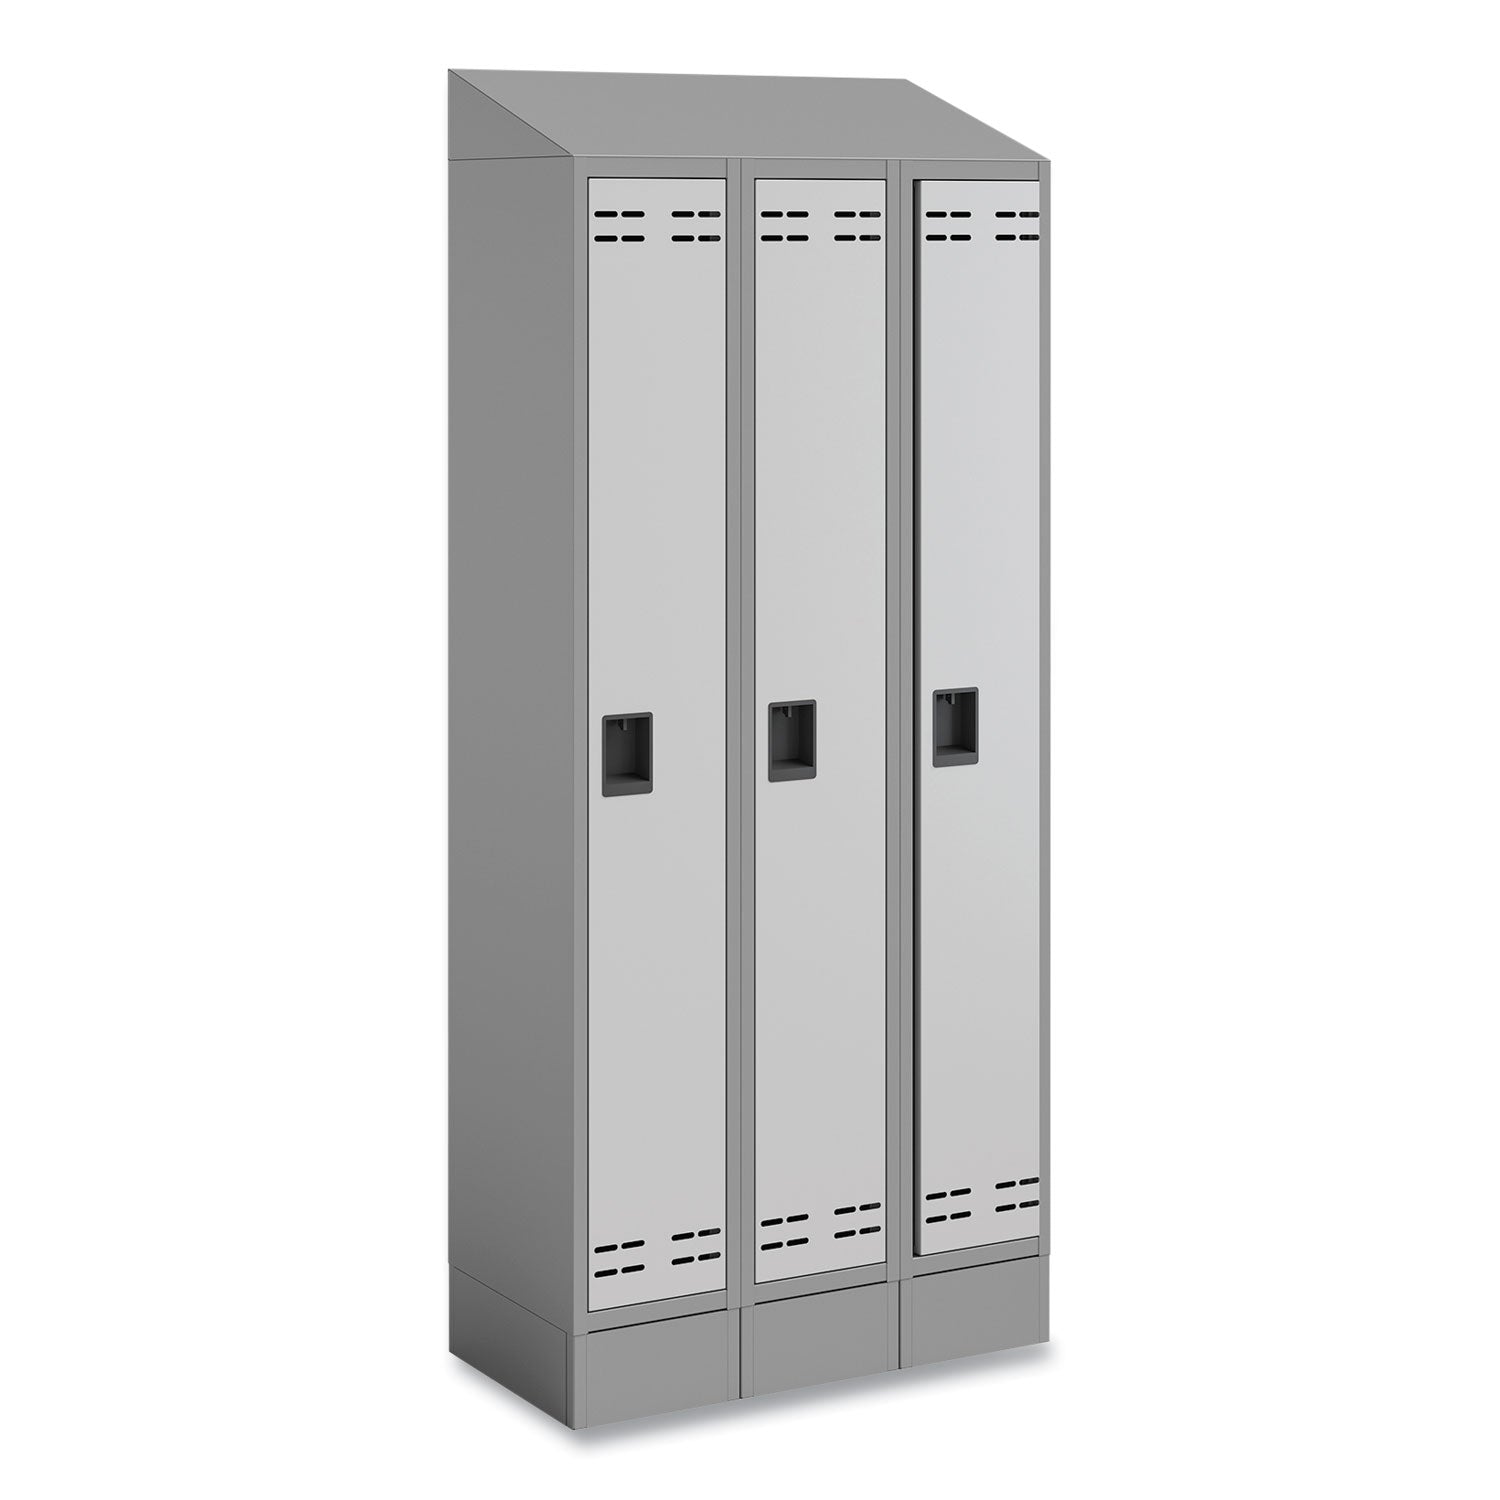 triple-continuous-metal-locker-base-addition-35w-x-16d-x-575h-gray-ships-in-1-3-business-days_saf5520gr - 4